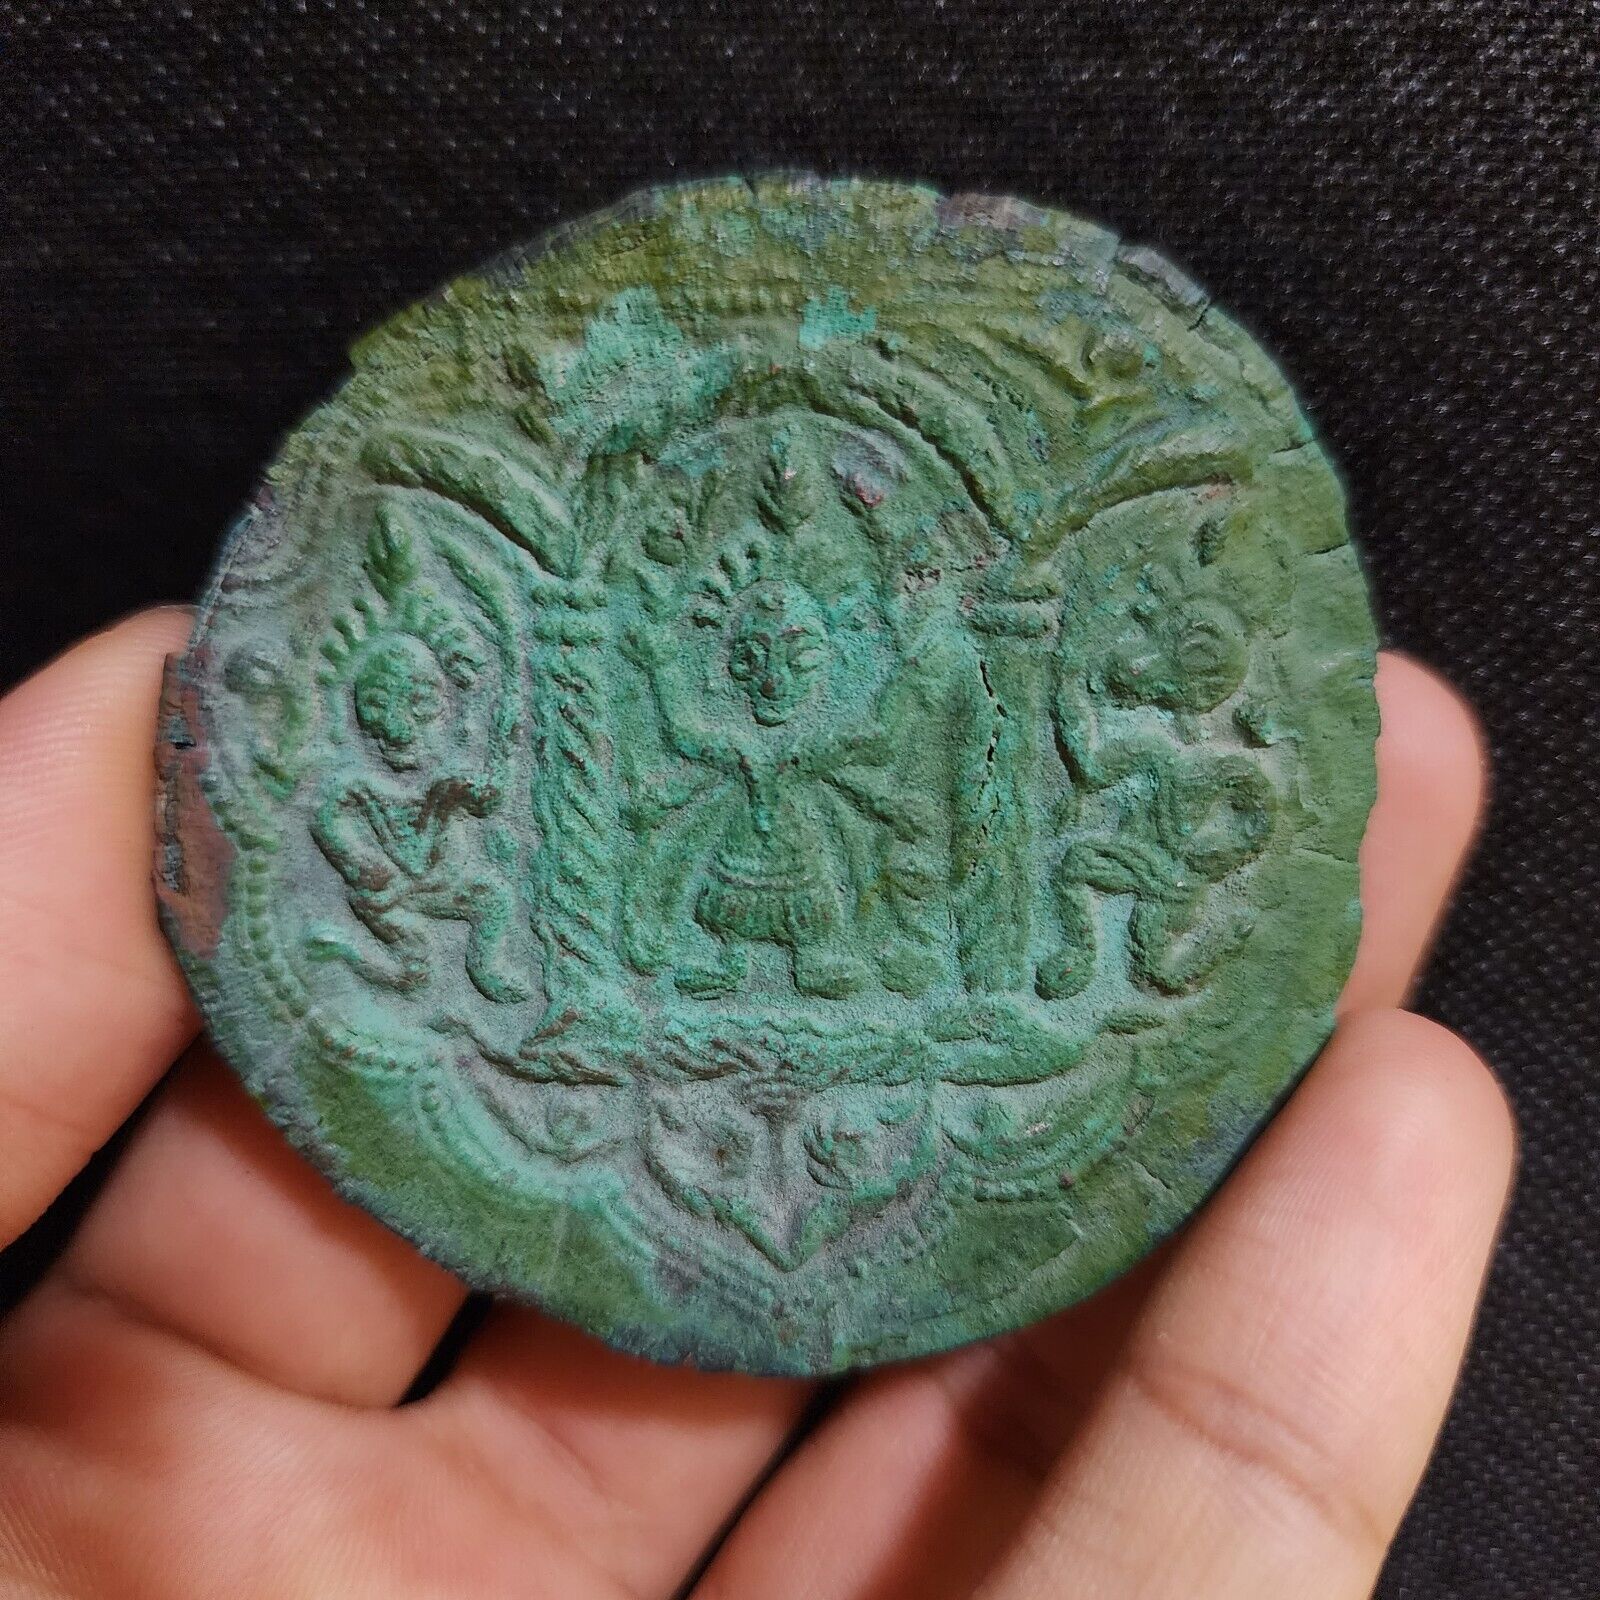 A SPECIAL BYZANTINE BRONZE STAMP OR MEDAL WITH SCENE. IMPORTANT 